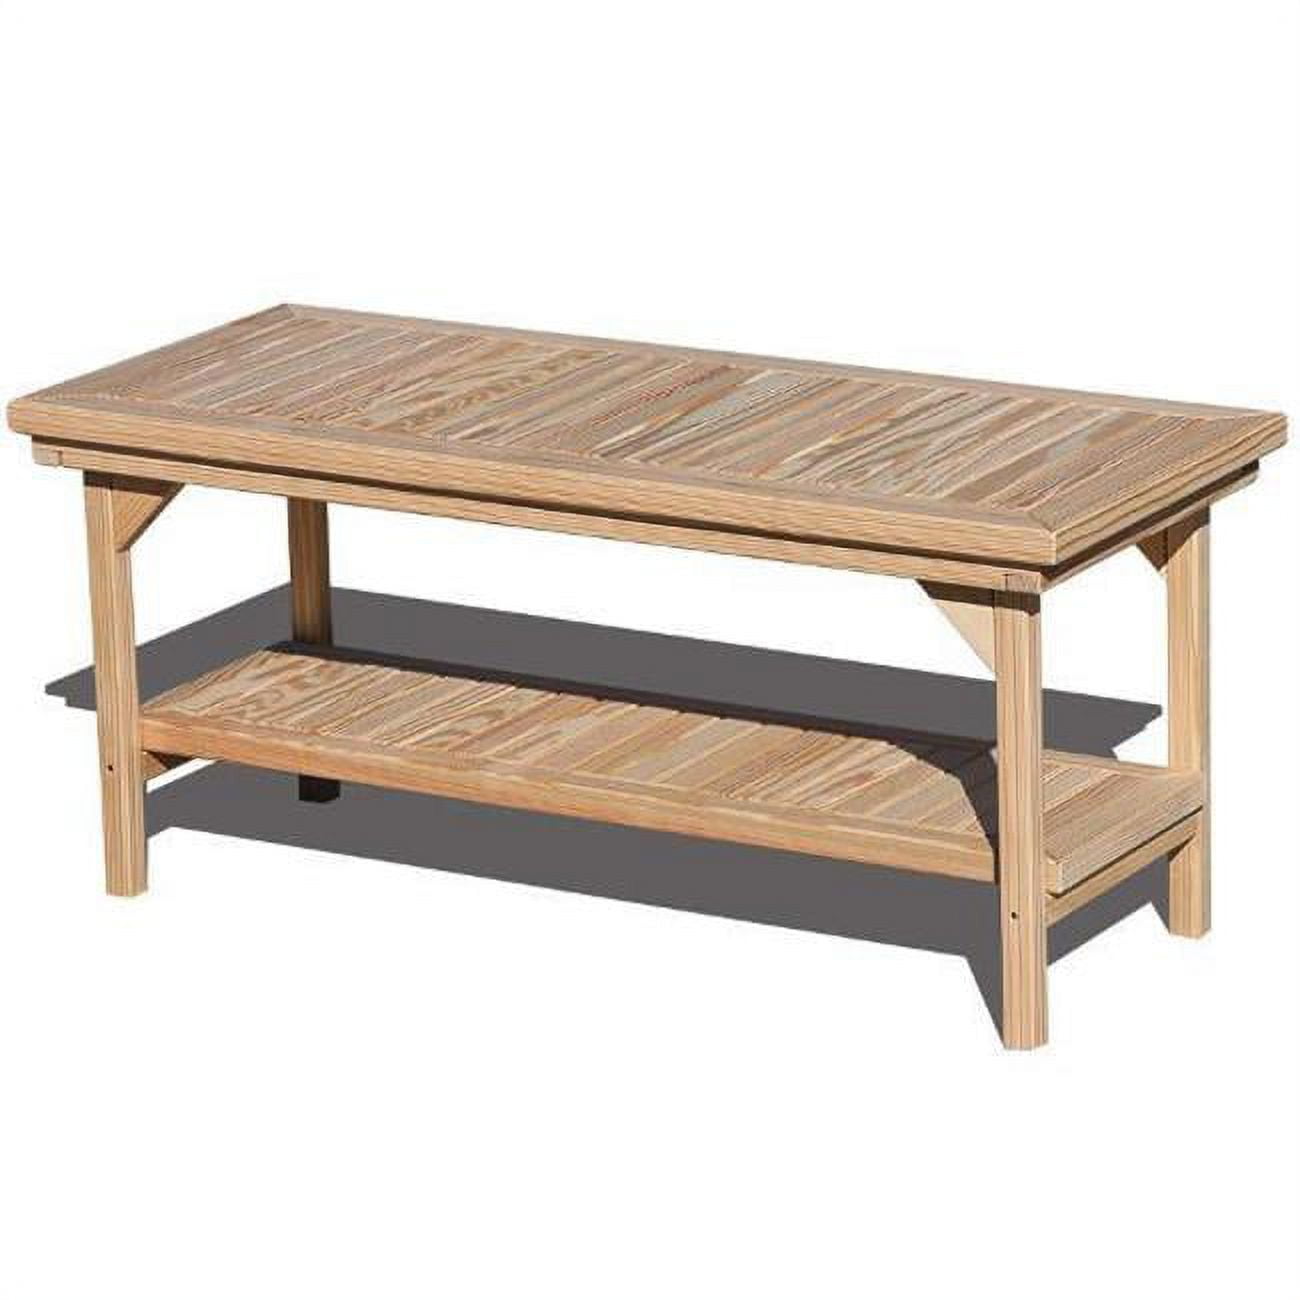 Fct2048cvd Treated Pine Coffee Table